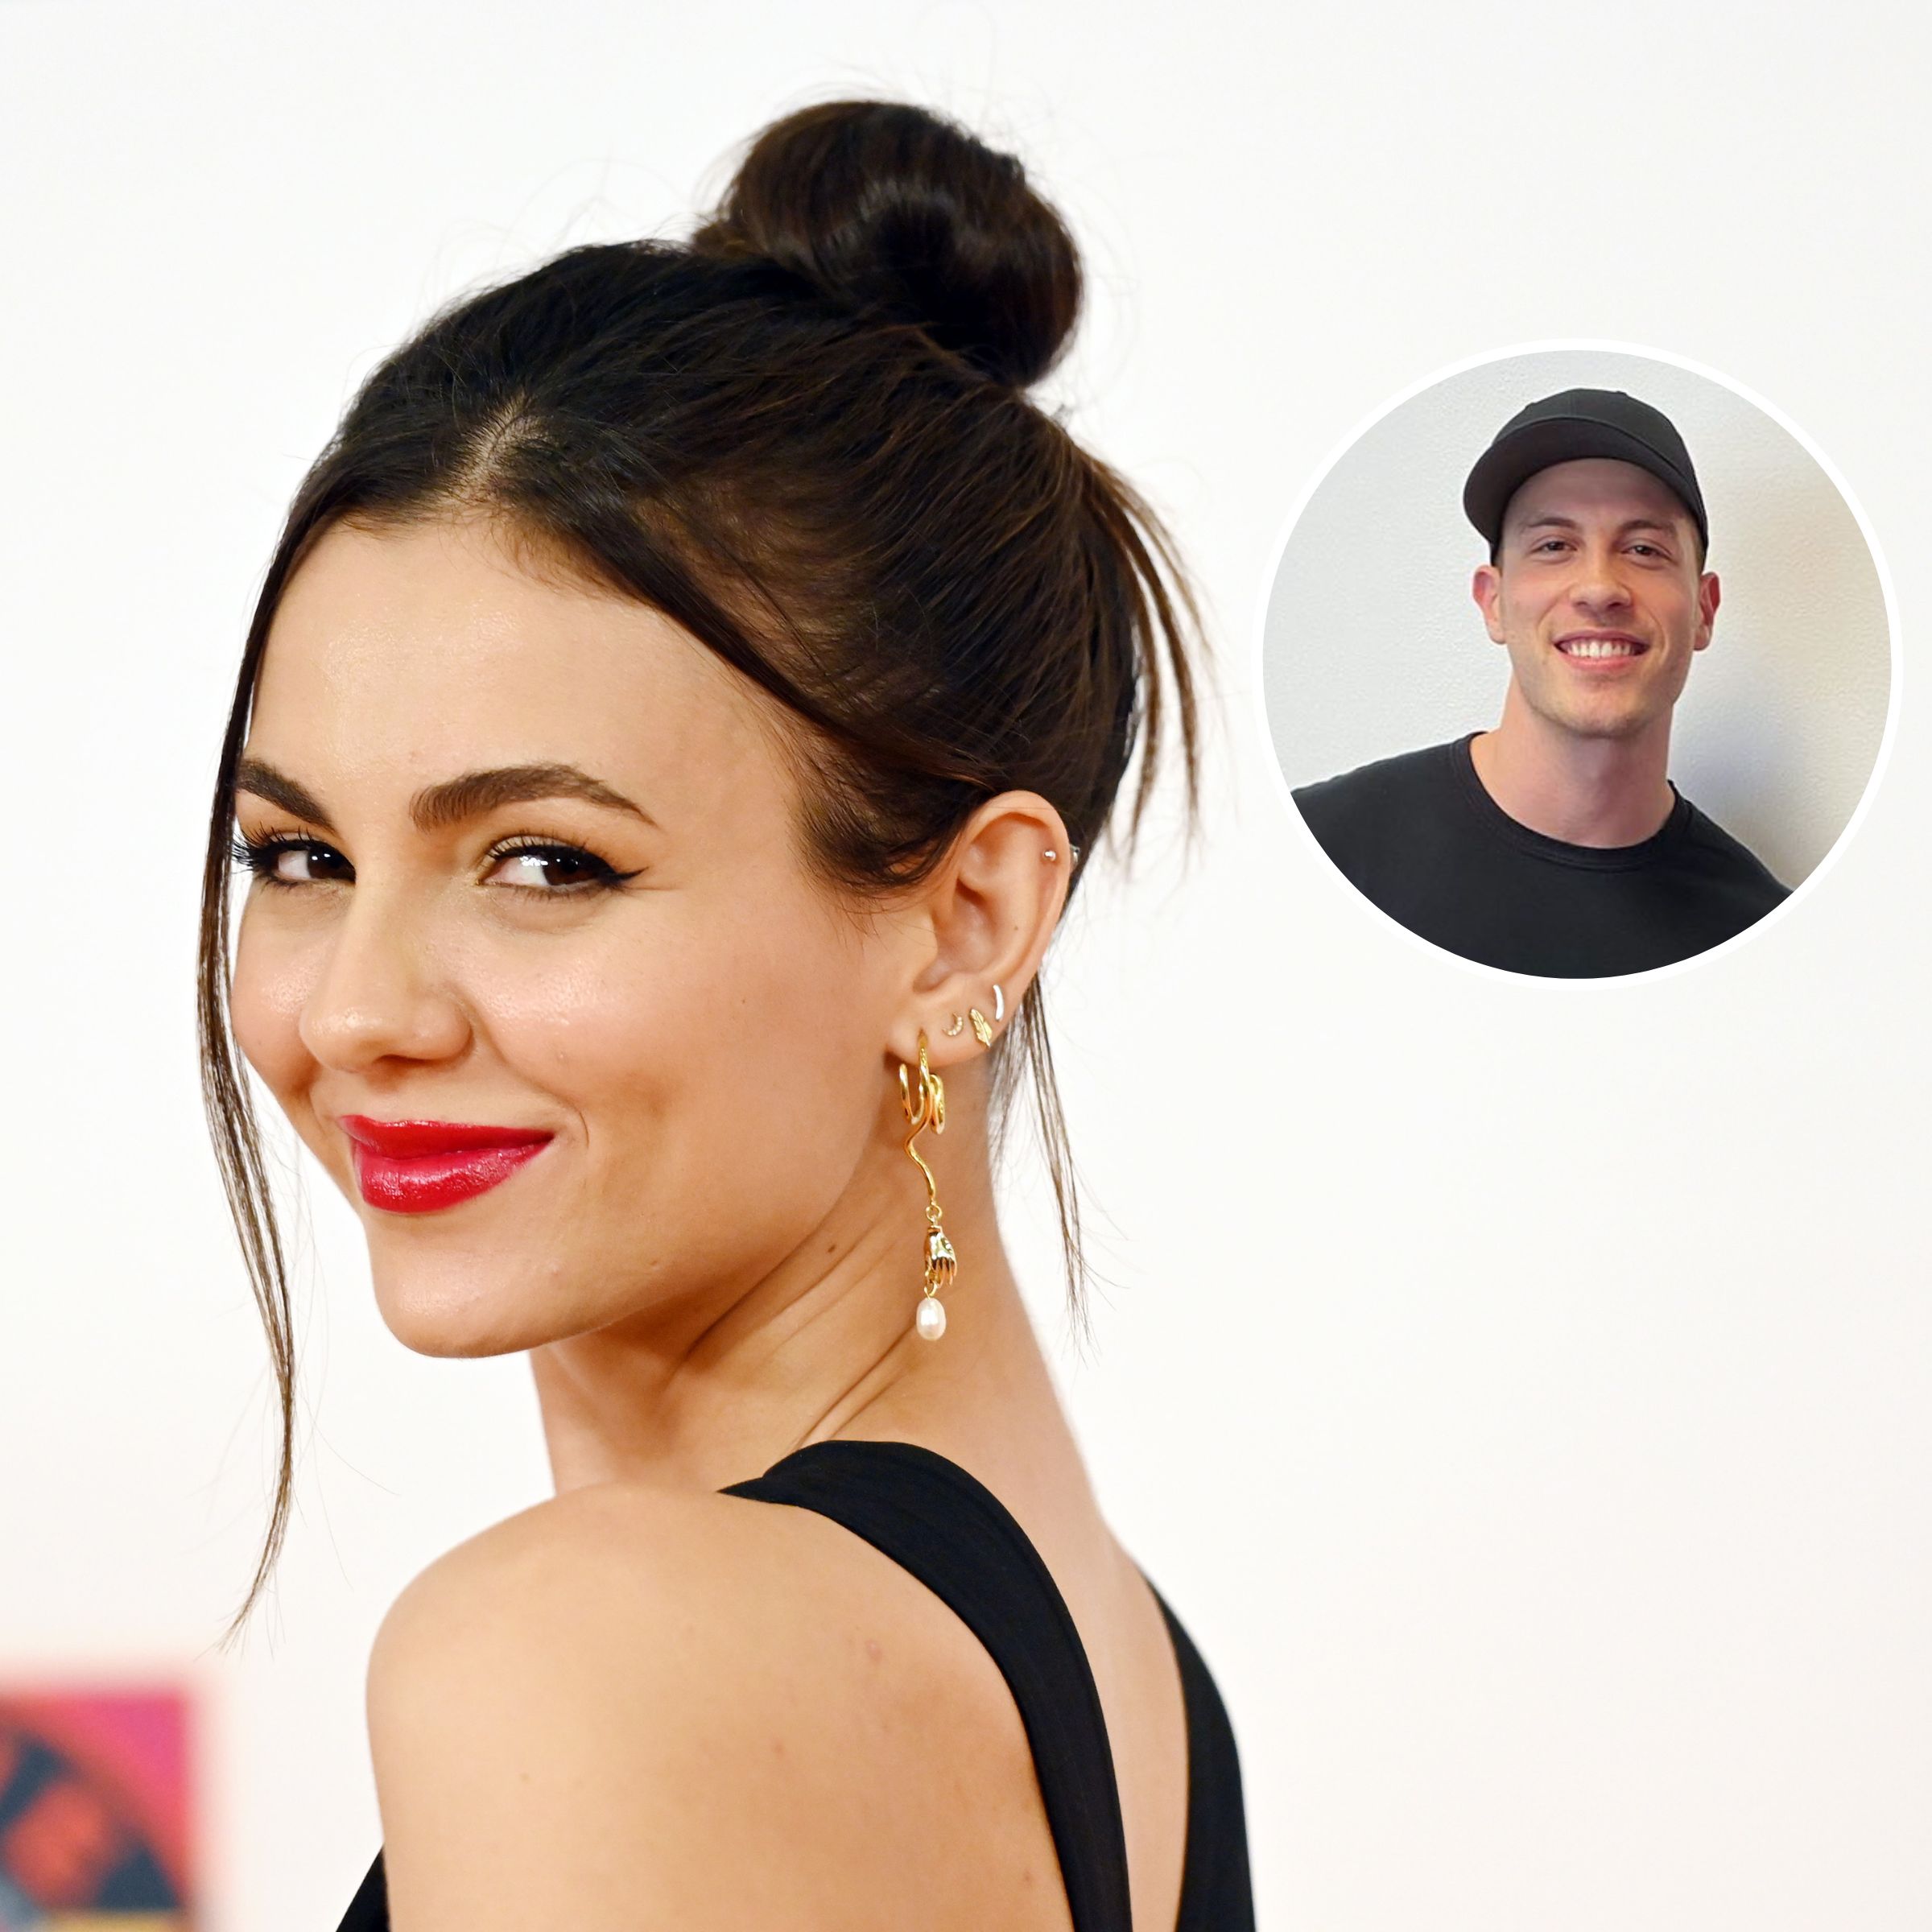 Who Is The Boyfriend Of Victoria Justice, The Actress Who Played